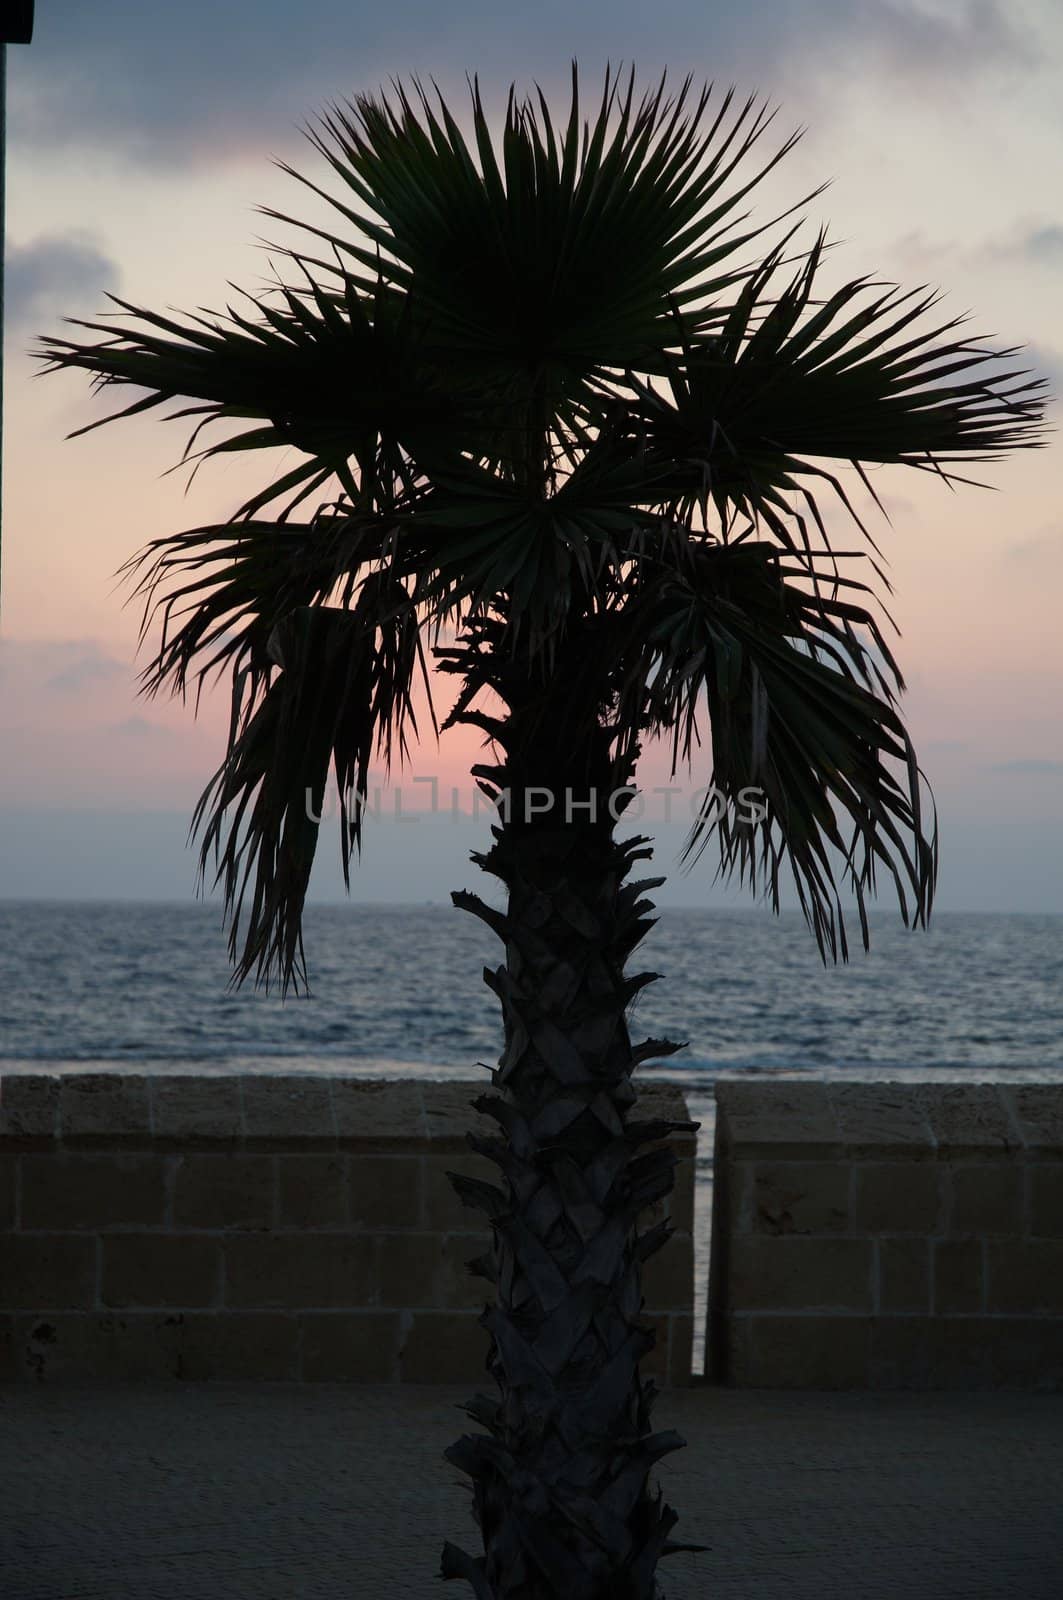 Silhouettes of palm trees against a beautiful sunset.